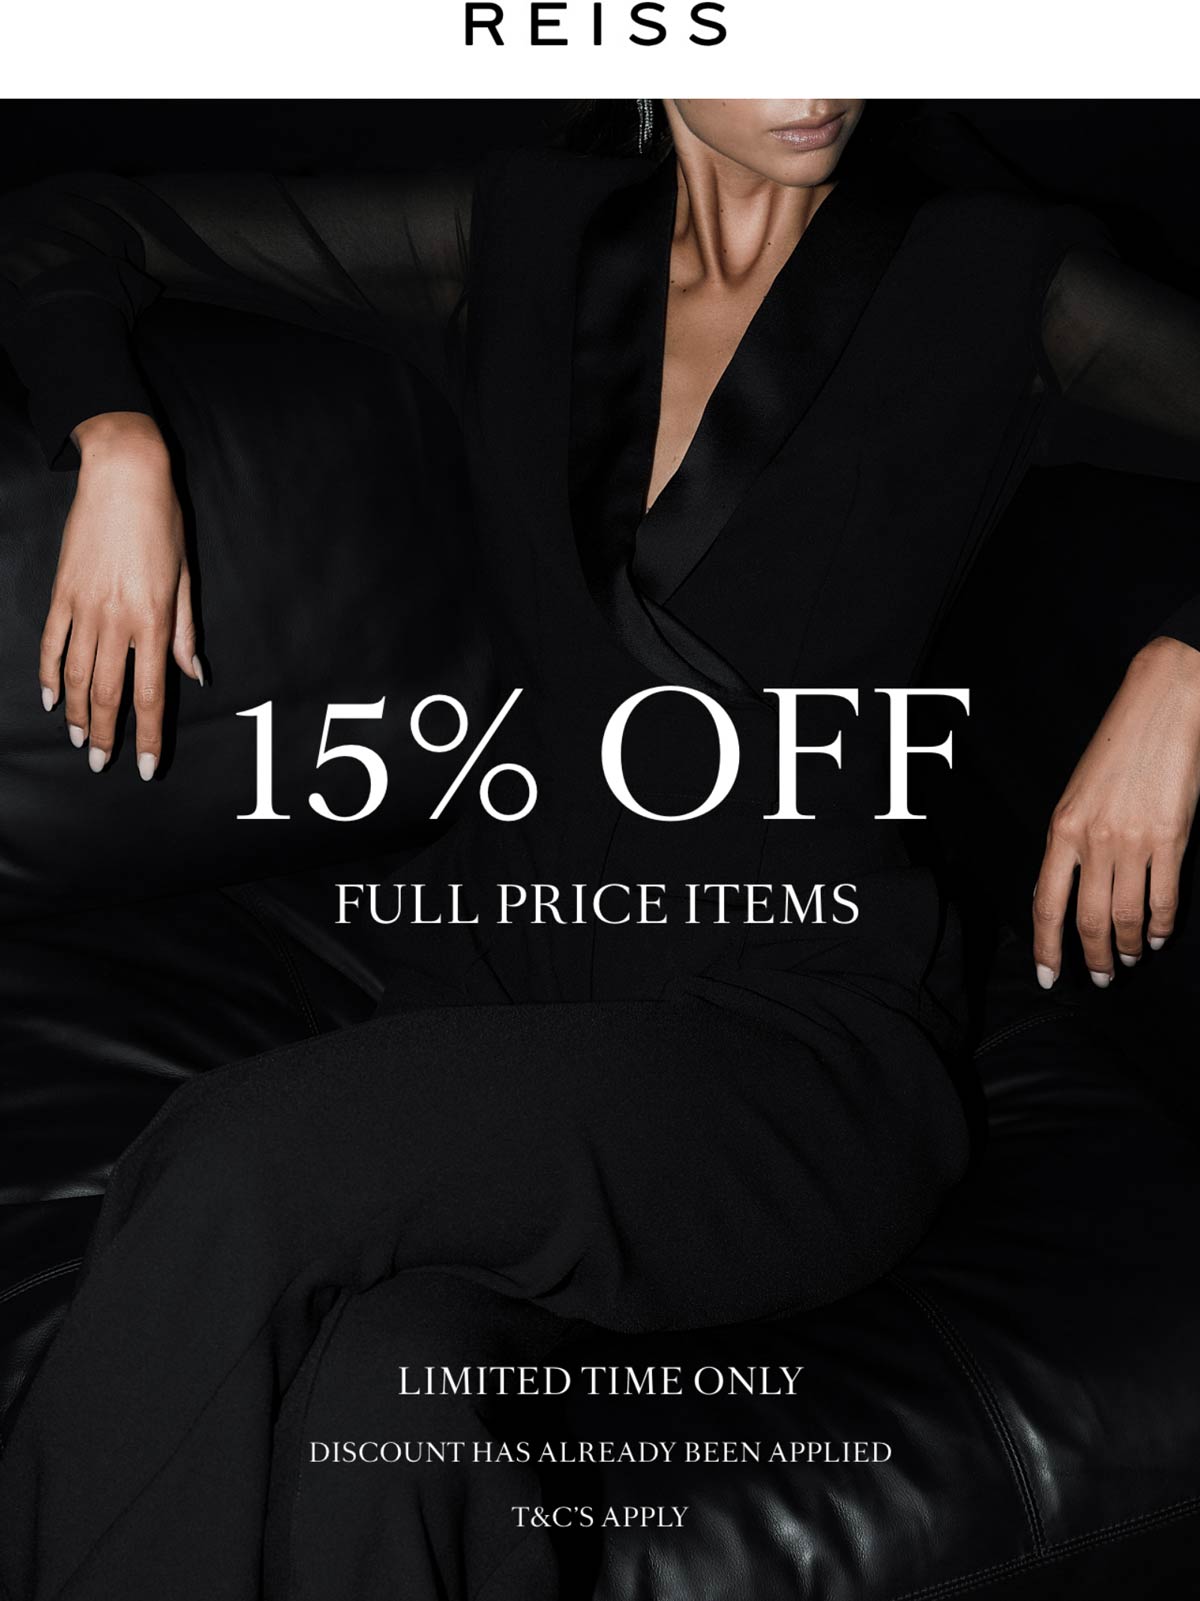 REISS stores Coupon  15% off at REISS #reiss 